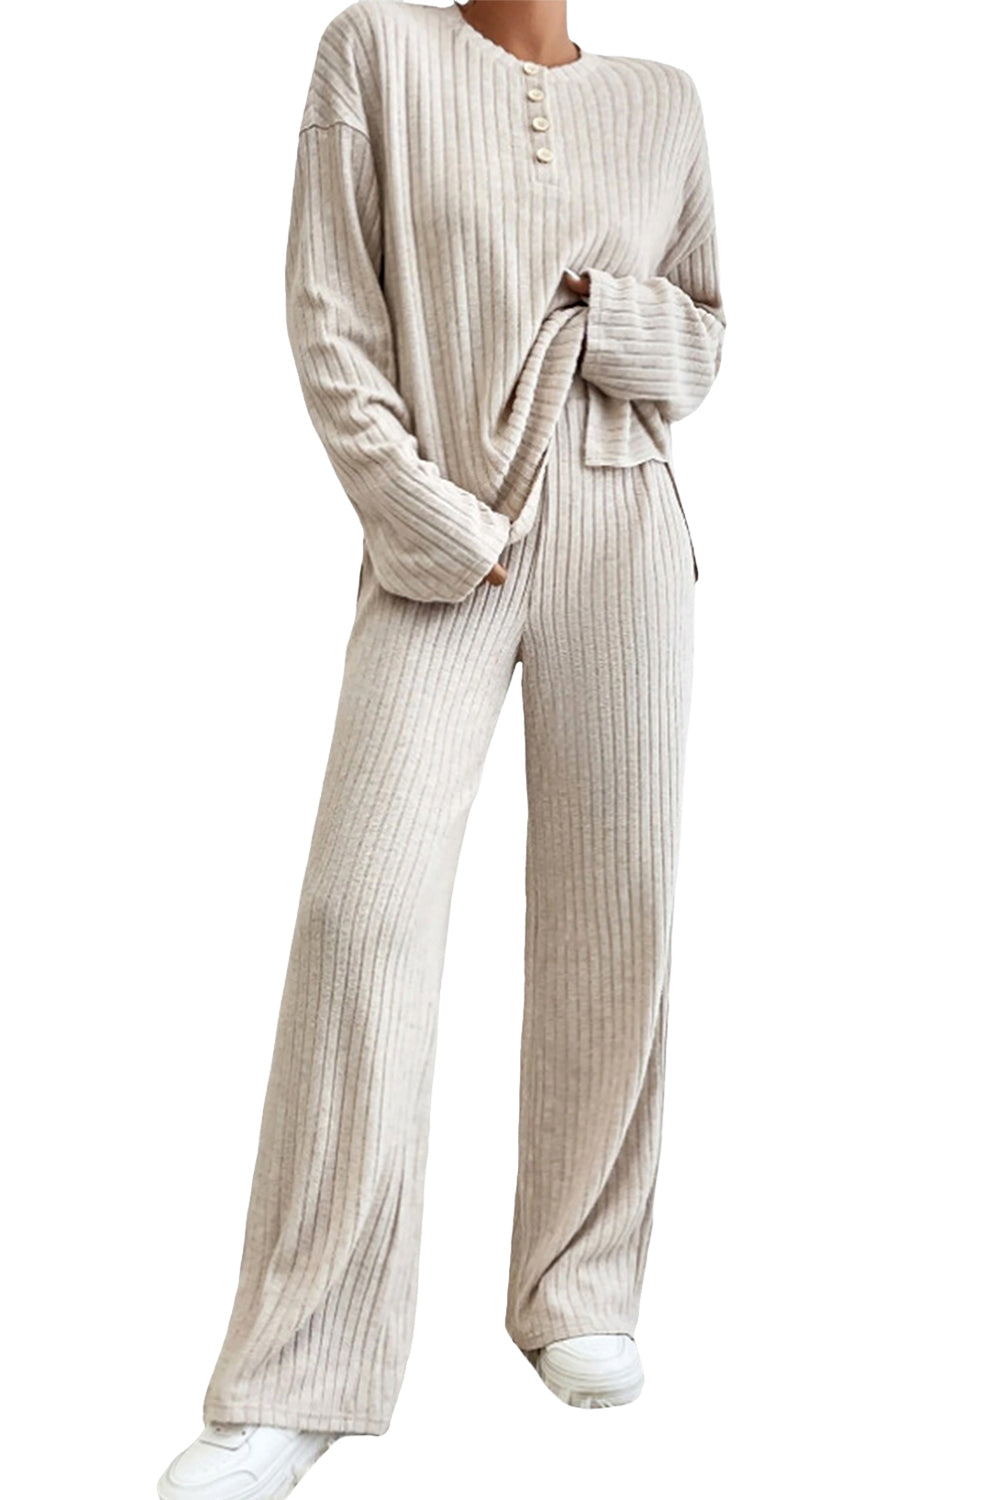 Ribbed Knit V Neck Slouchy Two-piece Outfit - pants or short set various colors - women's pants set at TFC&H Co.